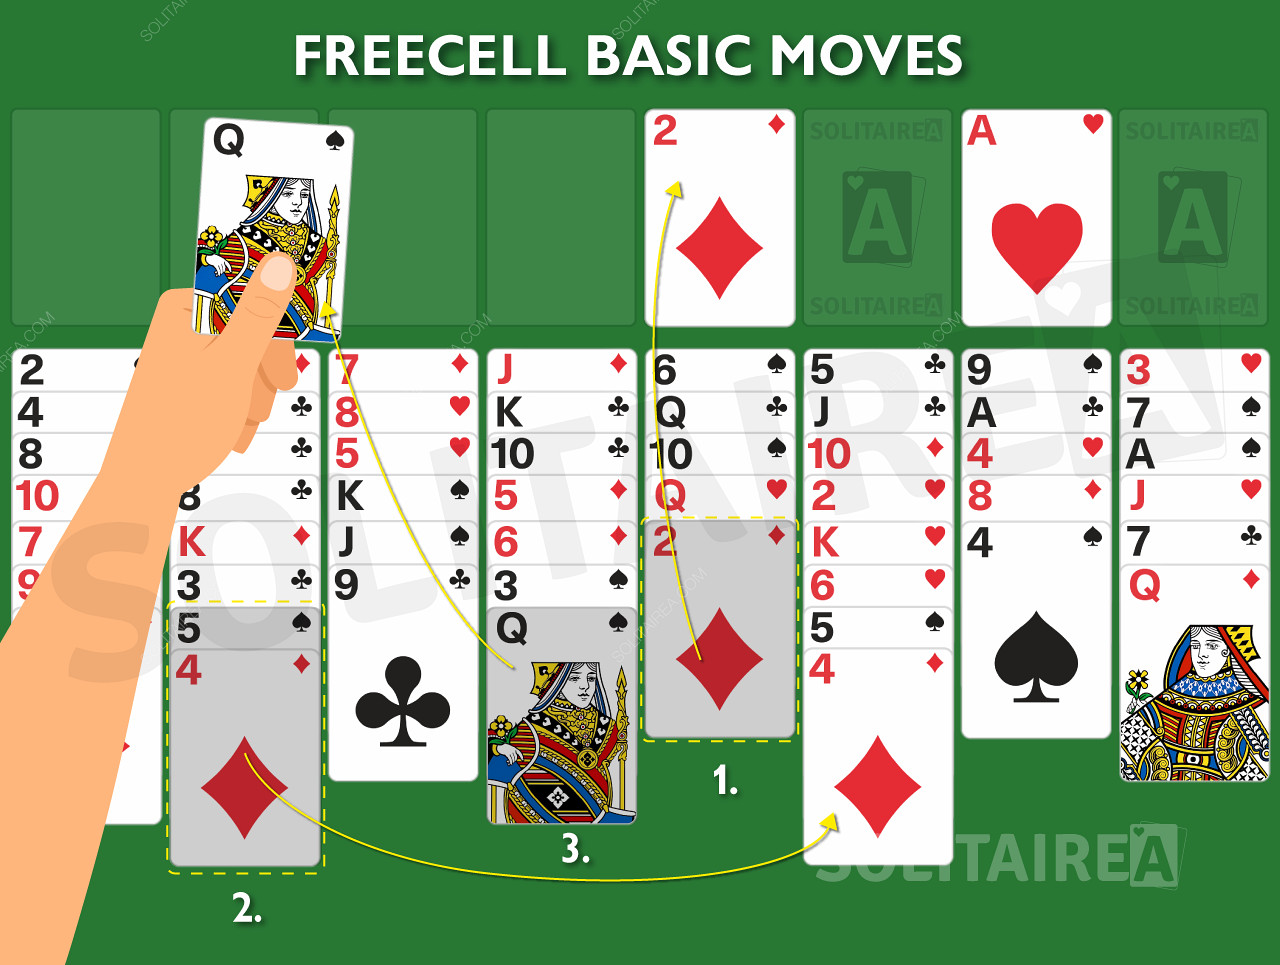 Gameplay image showing the basic rules in action